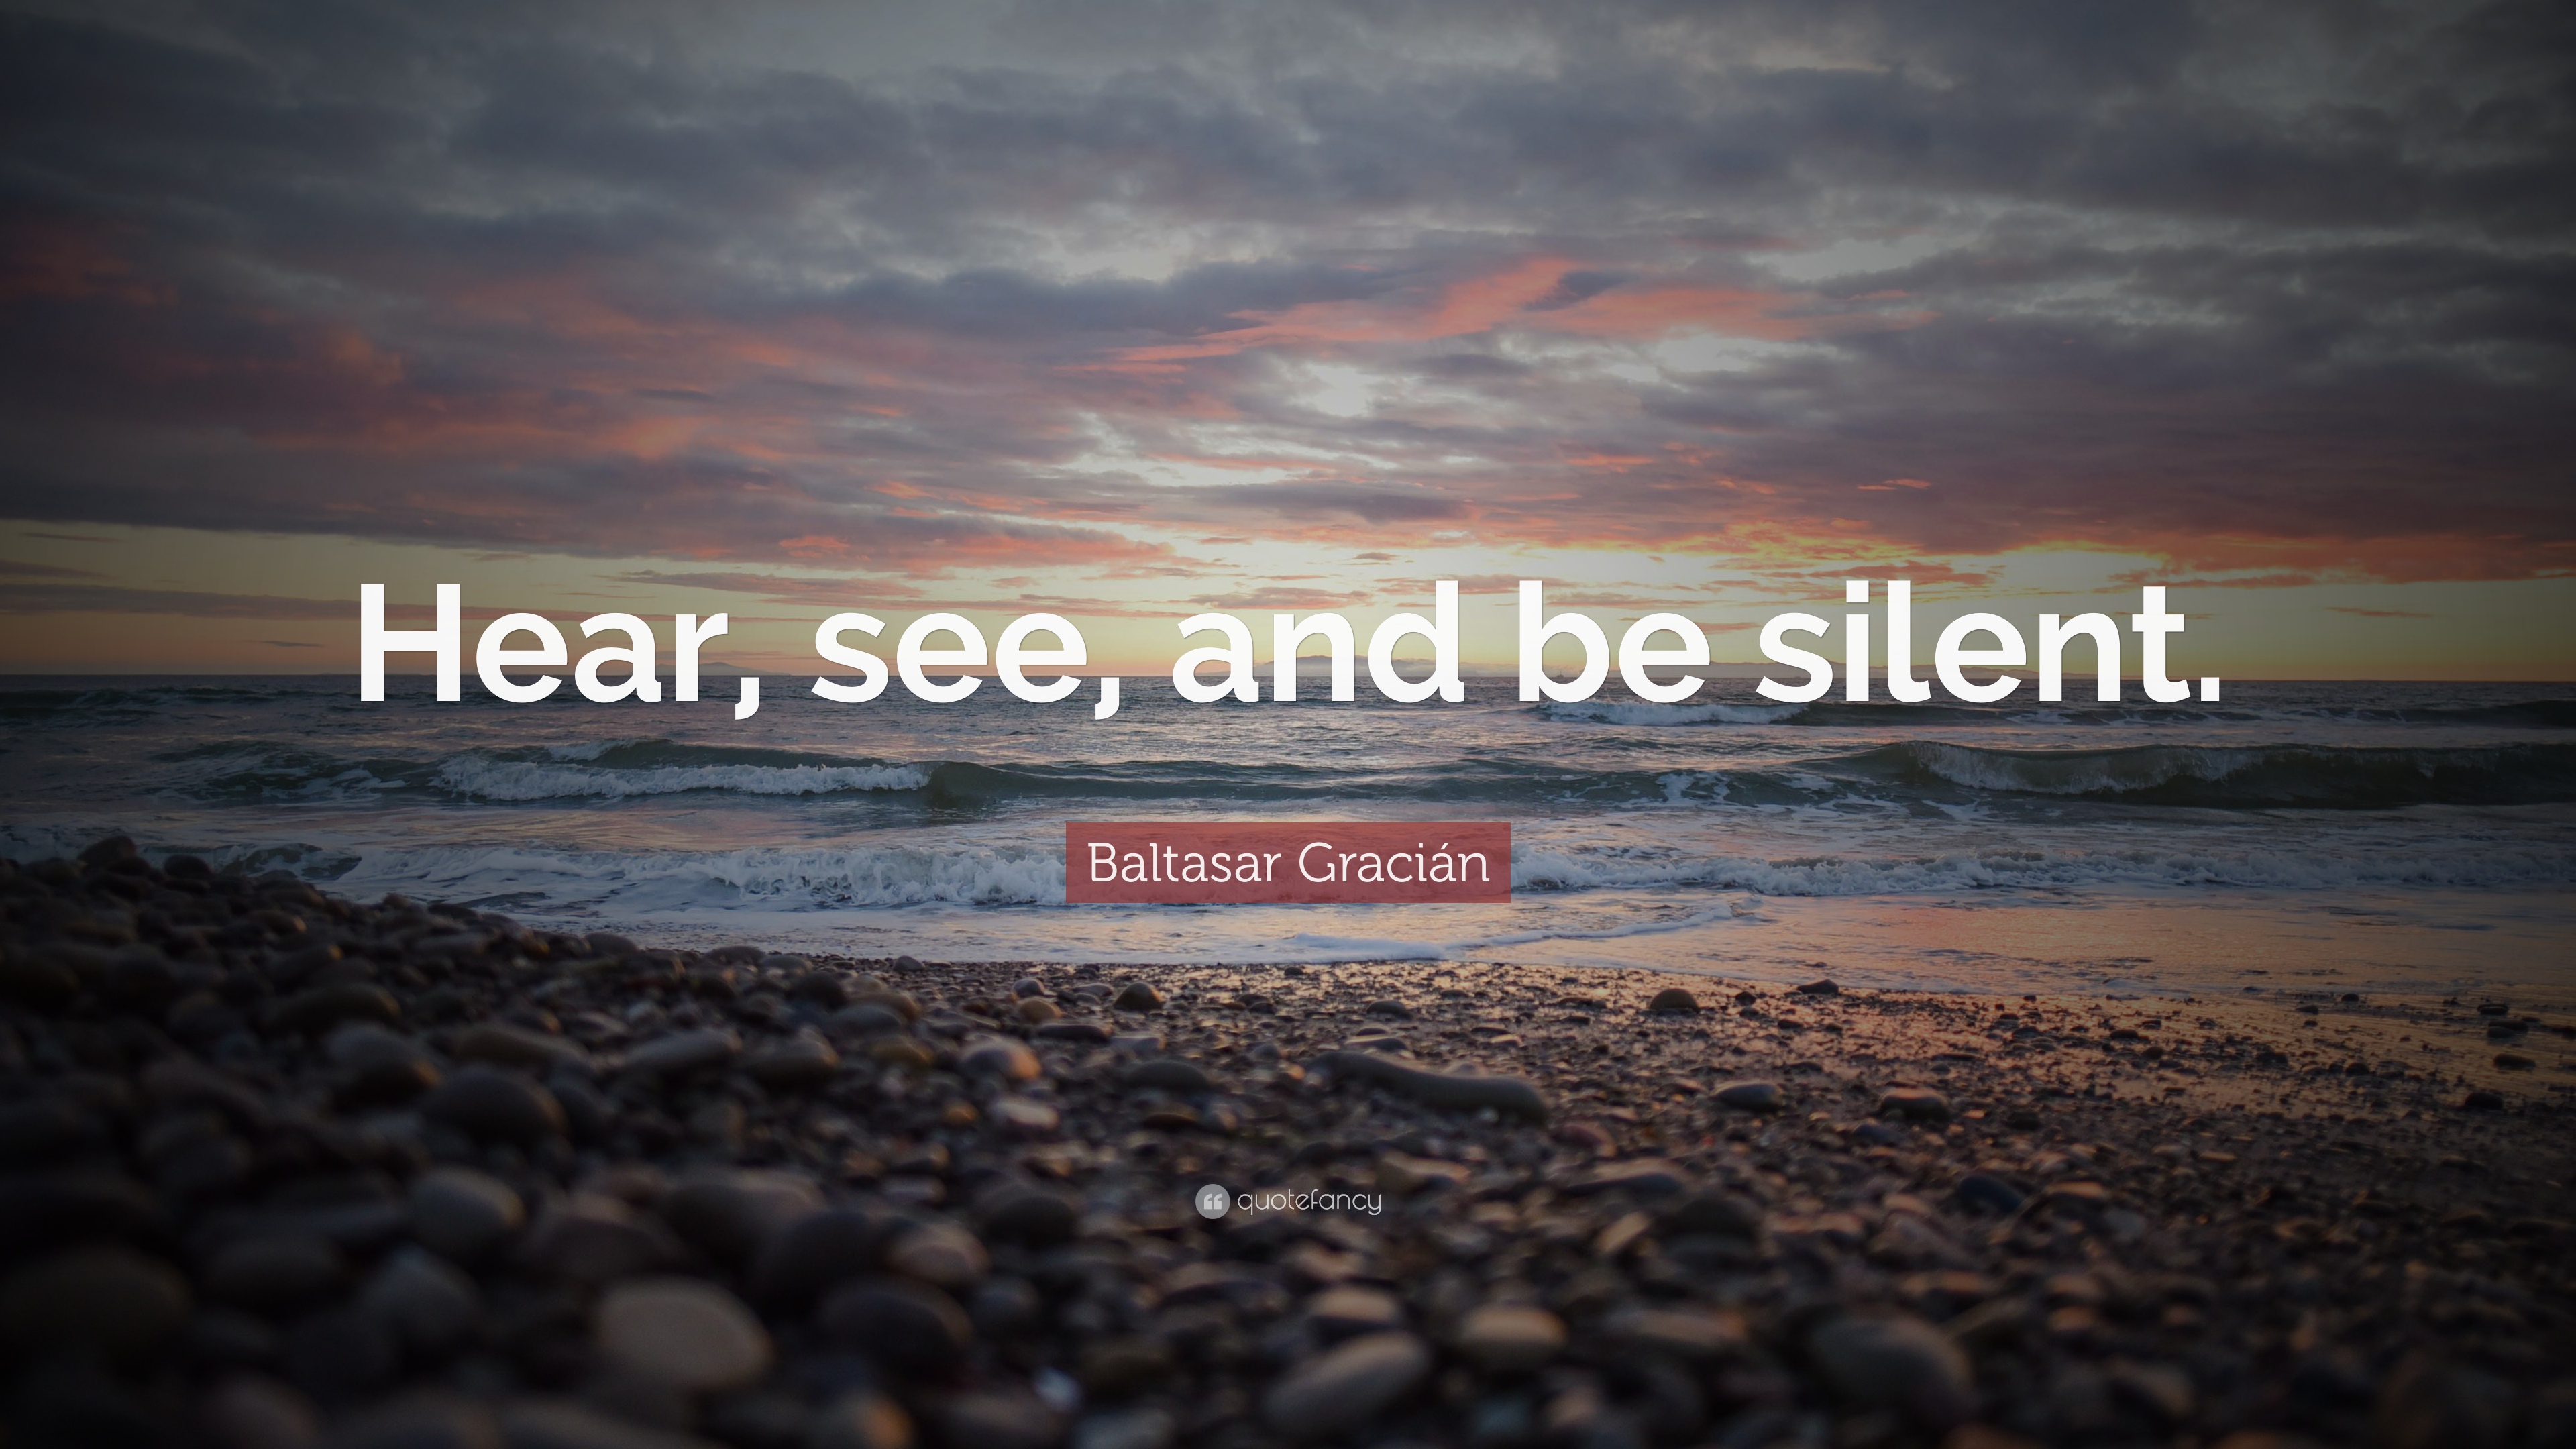 Baltasar Gracián Quote: “Hear, see, and be silent.” 6 wallpaper